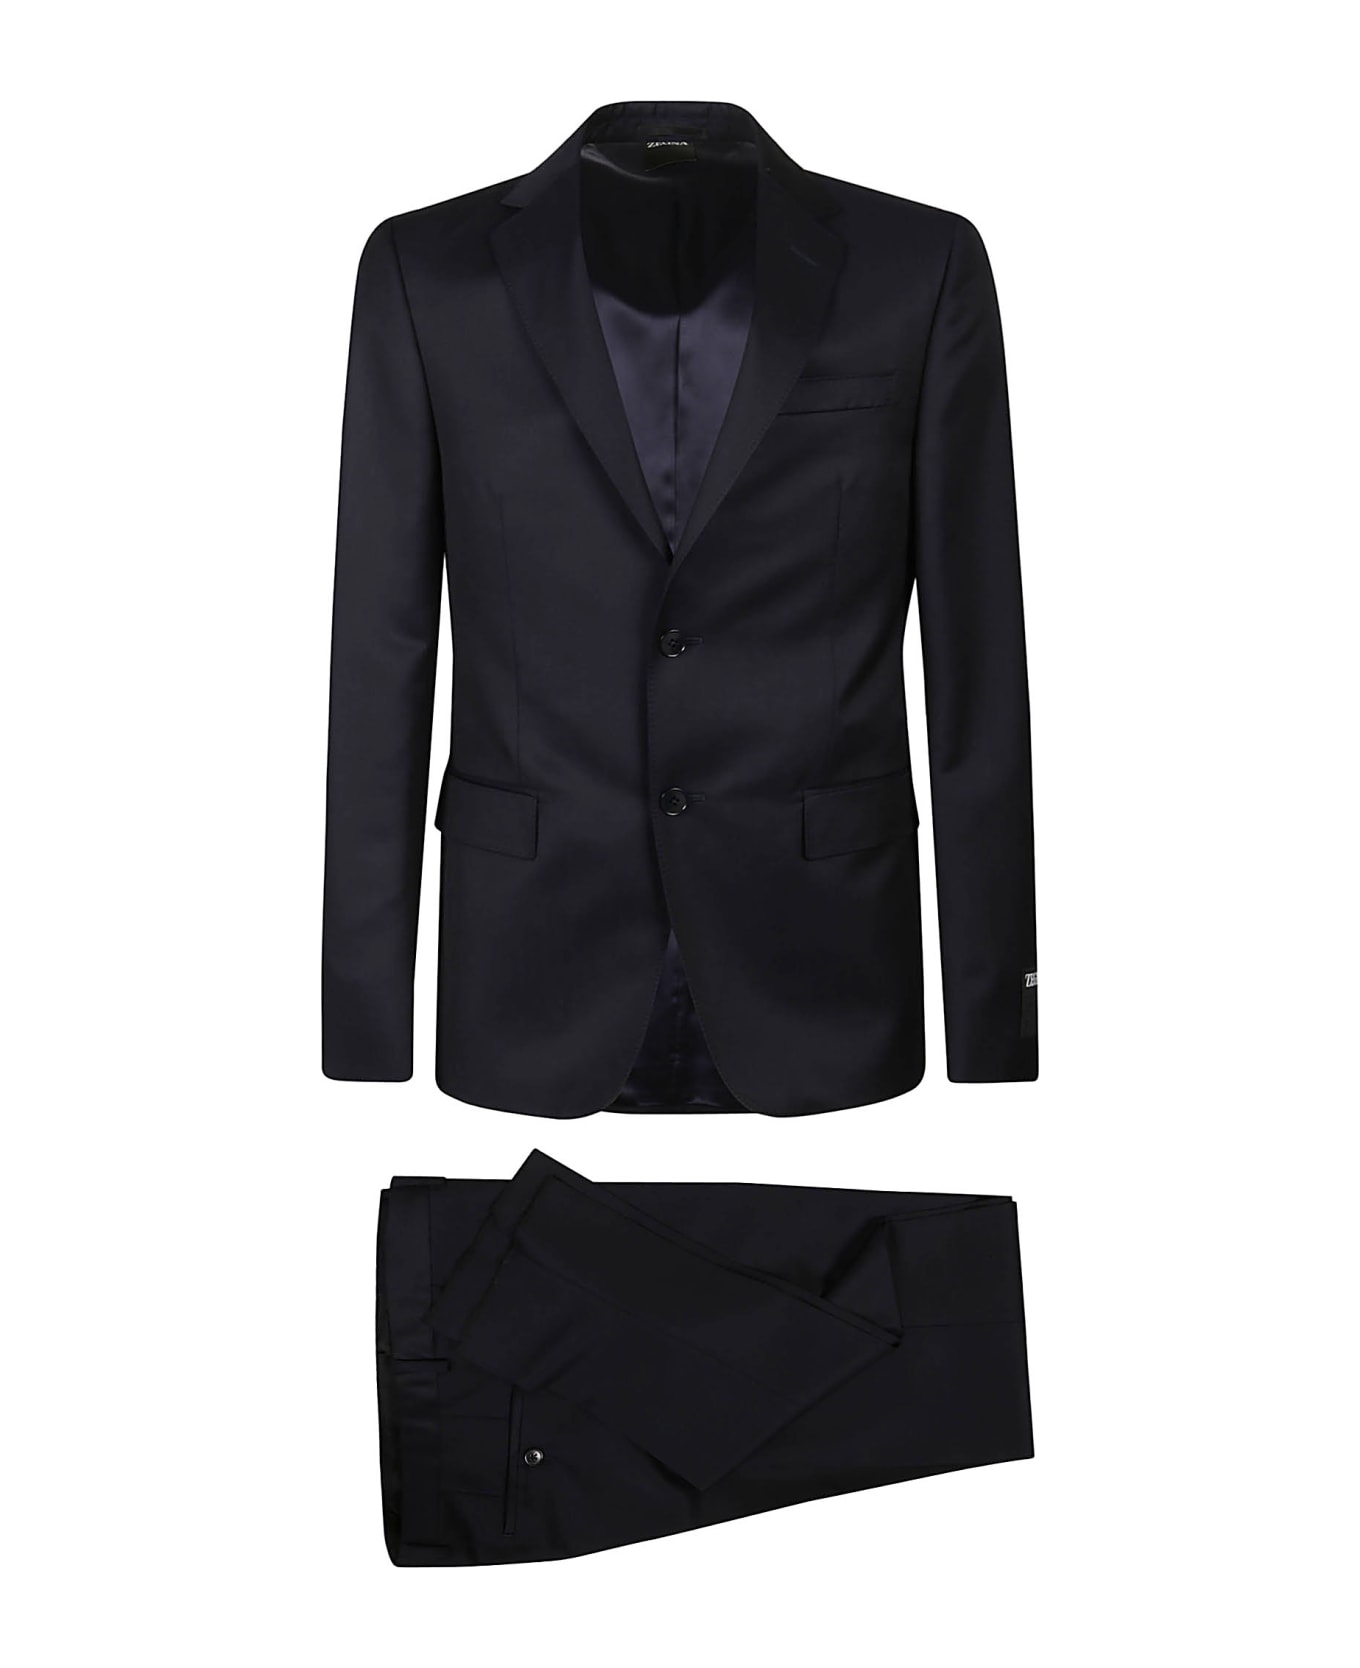 Zegna Lux Tailoring Suit - Navy